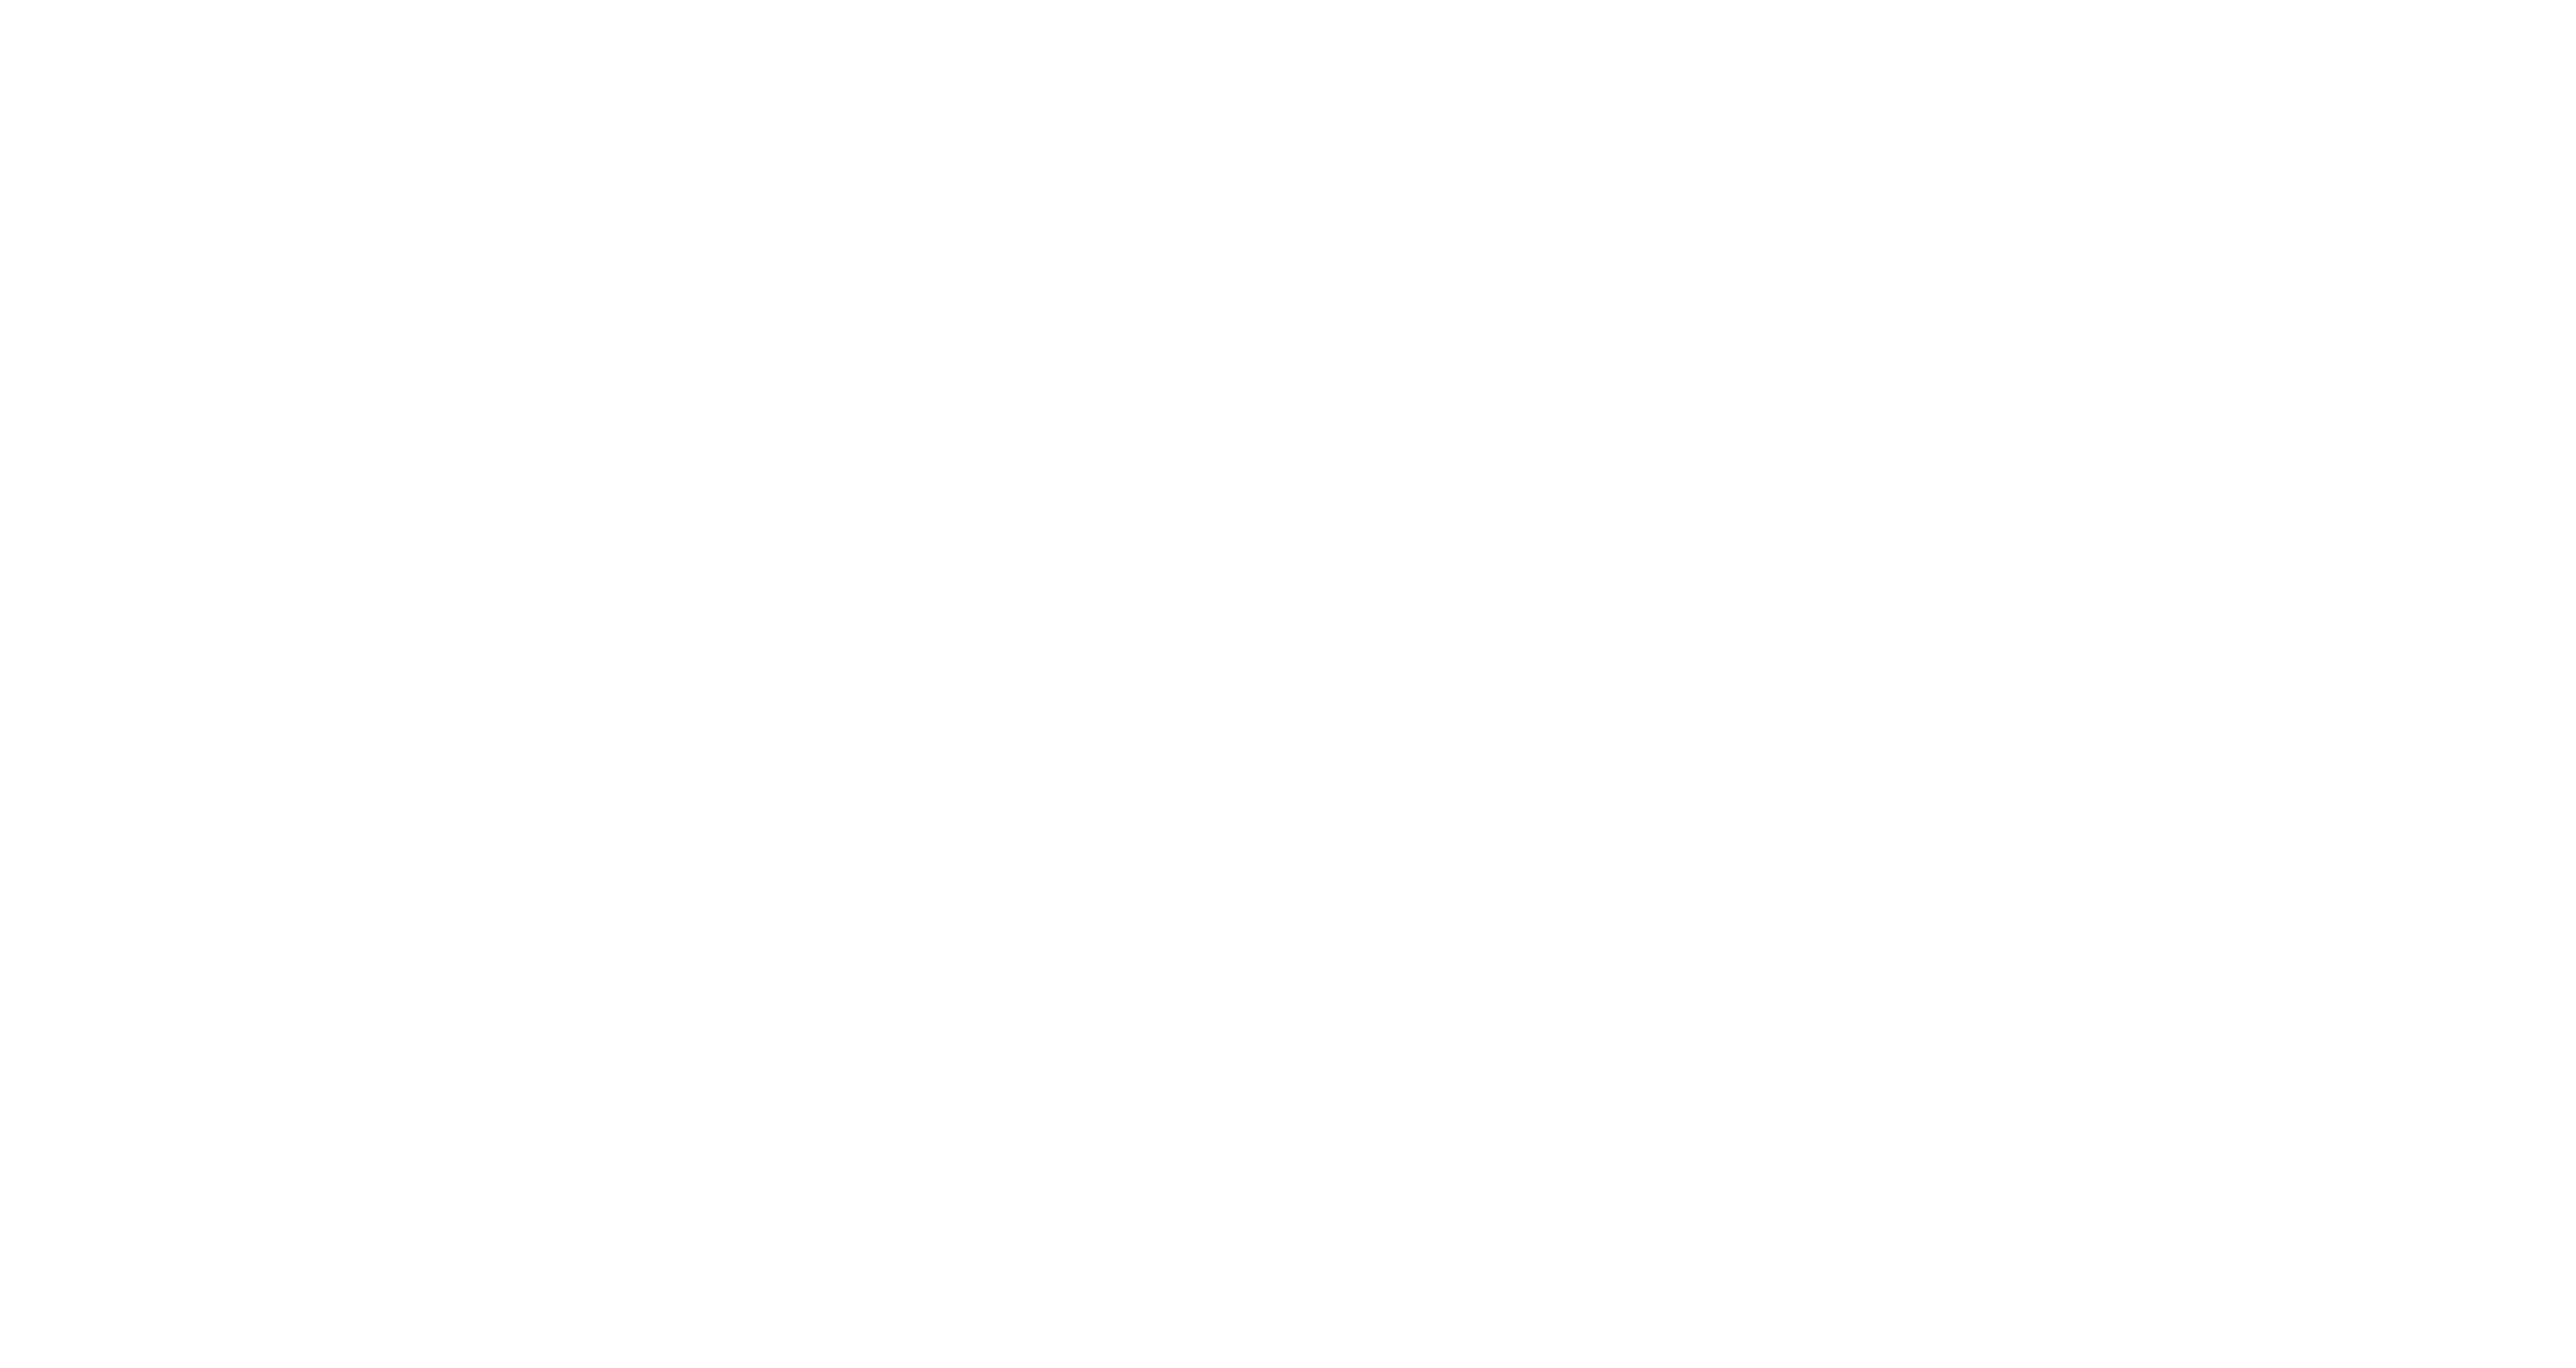 Illinois. Are you up for amazing?